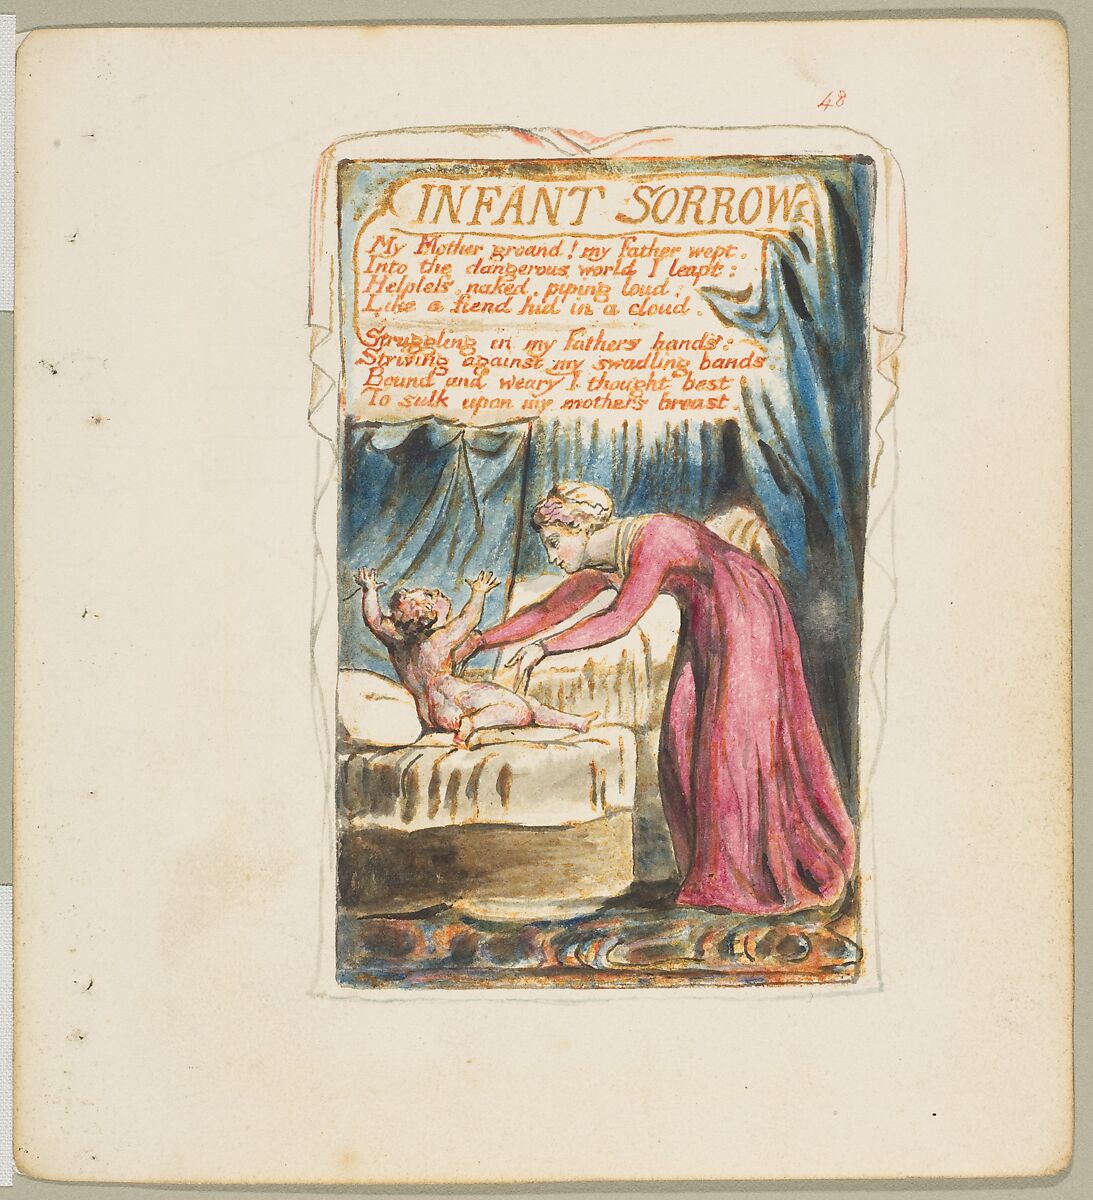 Songs of Experience: Infant Sorrow, William Blake, Relief etching printed in orange-brown ink and hand-colored with watercolor and shell gold